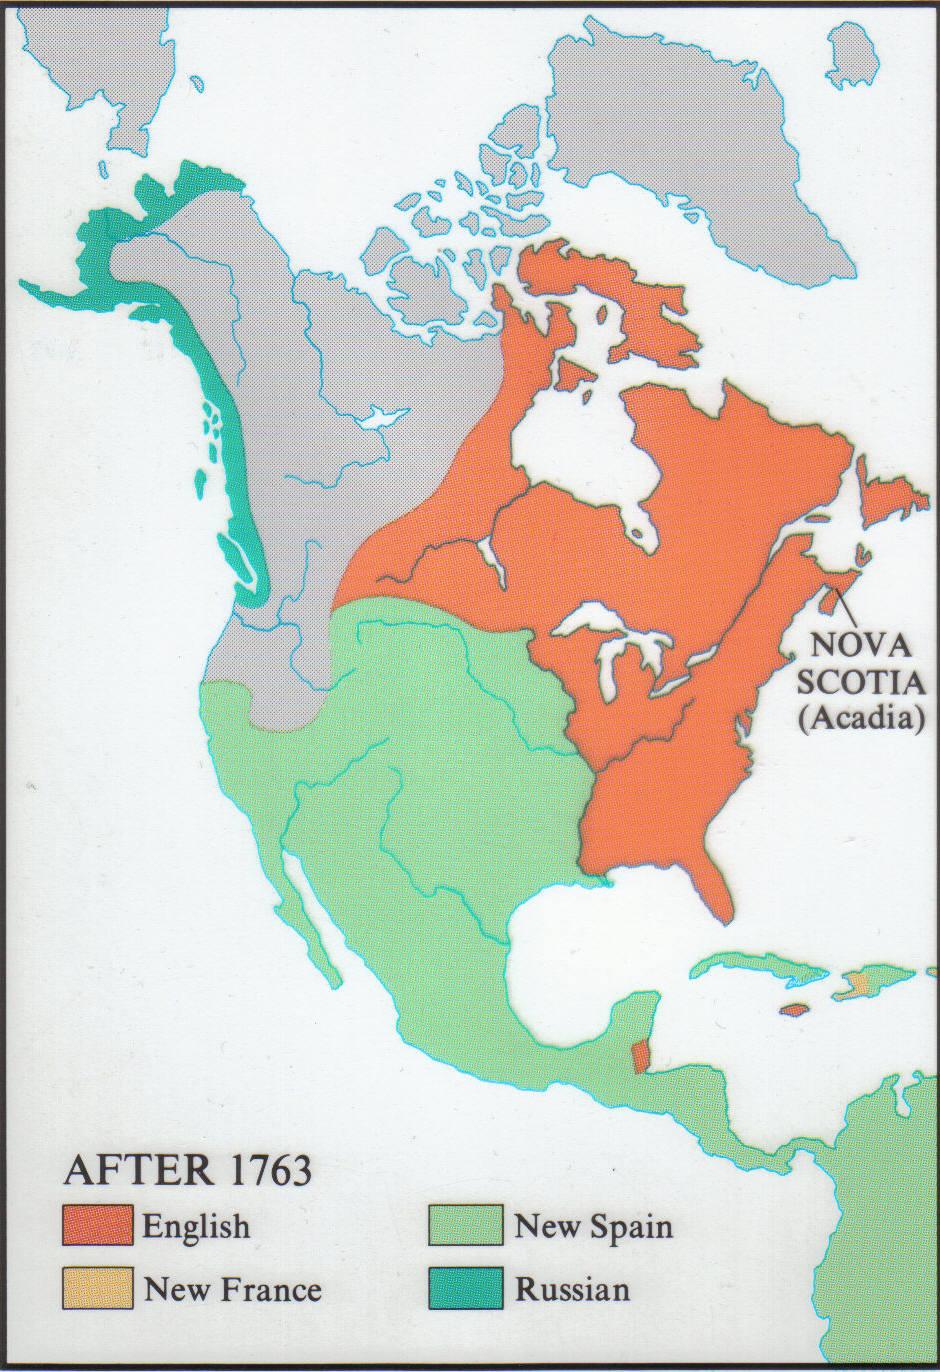 By the end of the war, England had complete control over North America. New France was now a British Colony, and France s presence in North America was reduced to three very small islands.